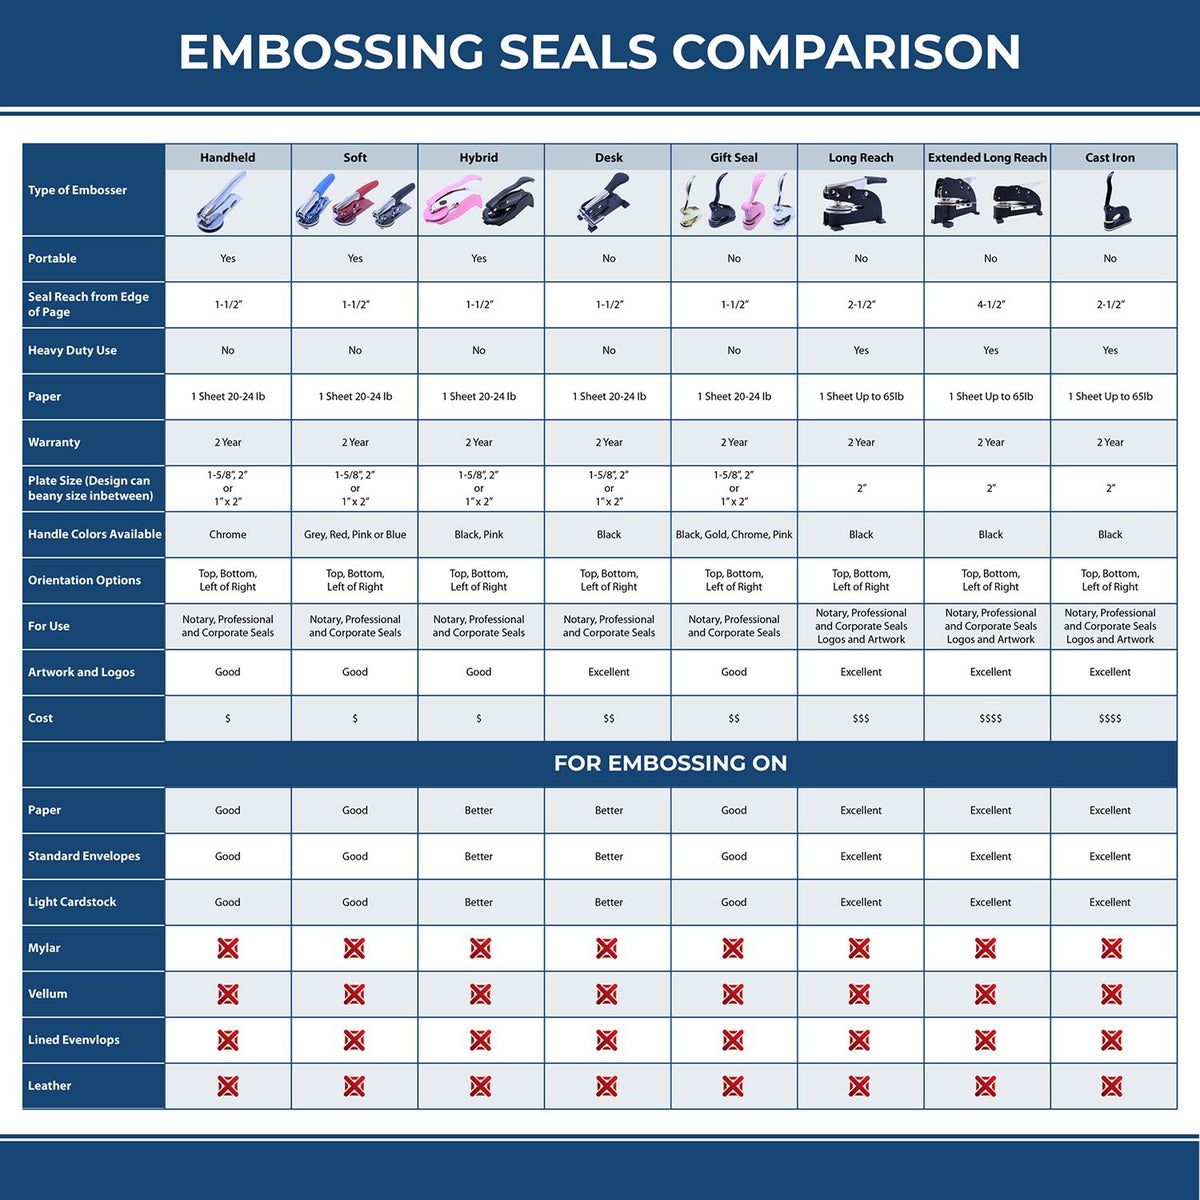 A comparison chart for the different types of mount models available for the Handheld Colorado Land Surveyor Seal.